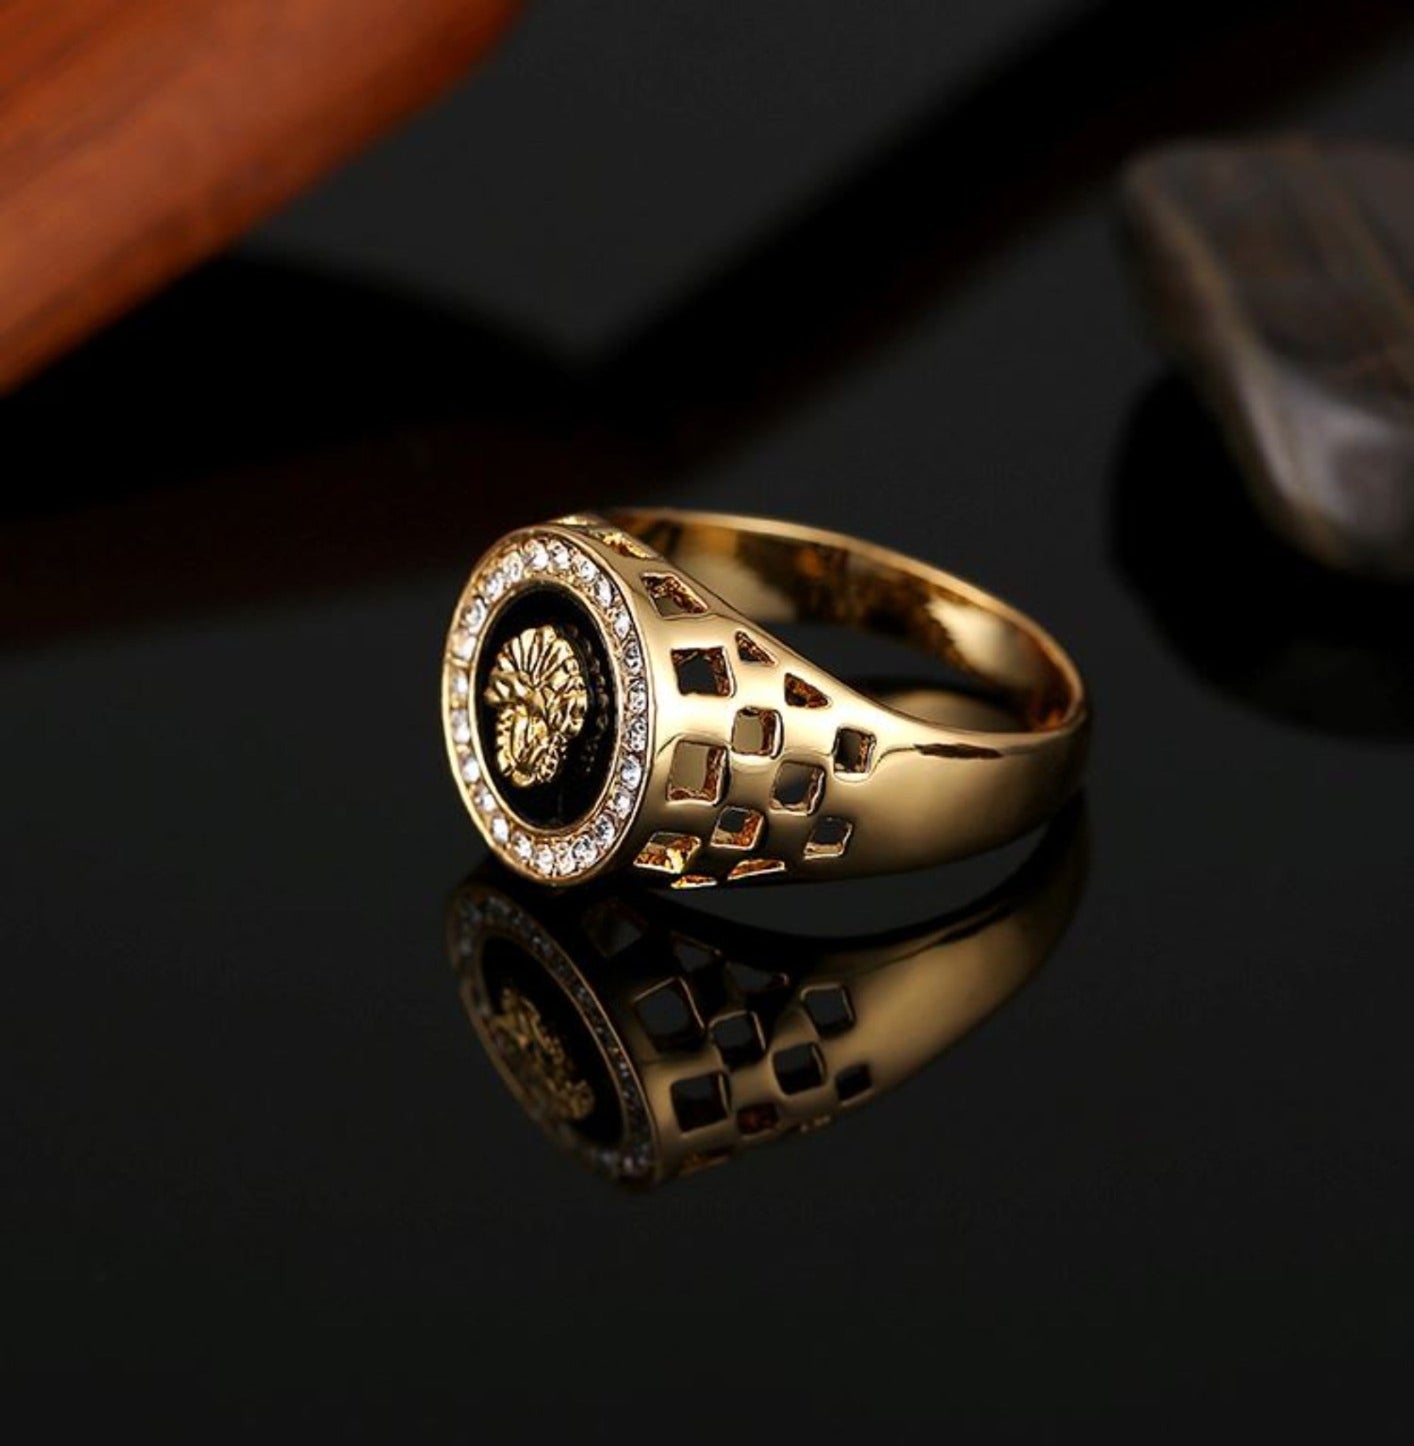 YADO RING ering Yubama Jewelry Online Store - The Elegant Designs of Gold and Silver ! Gold 10 